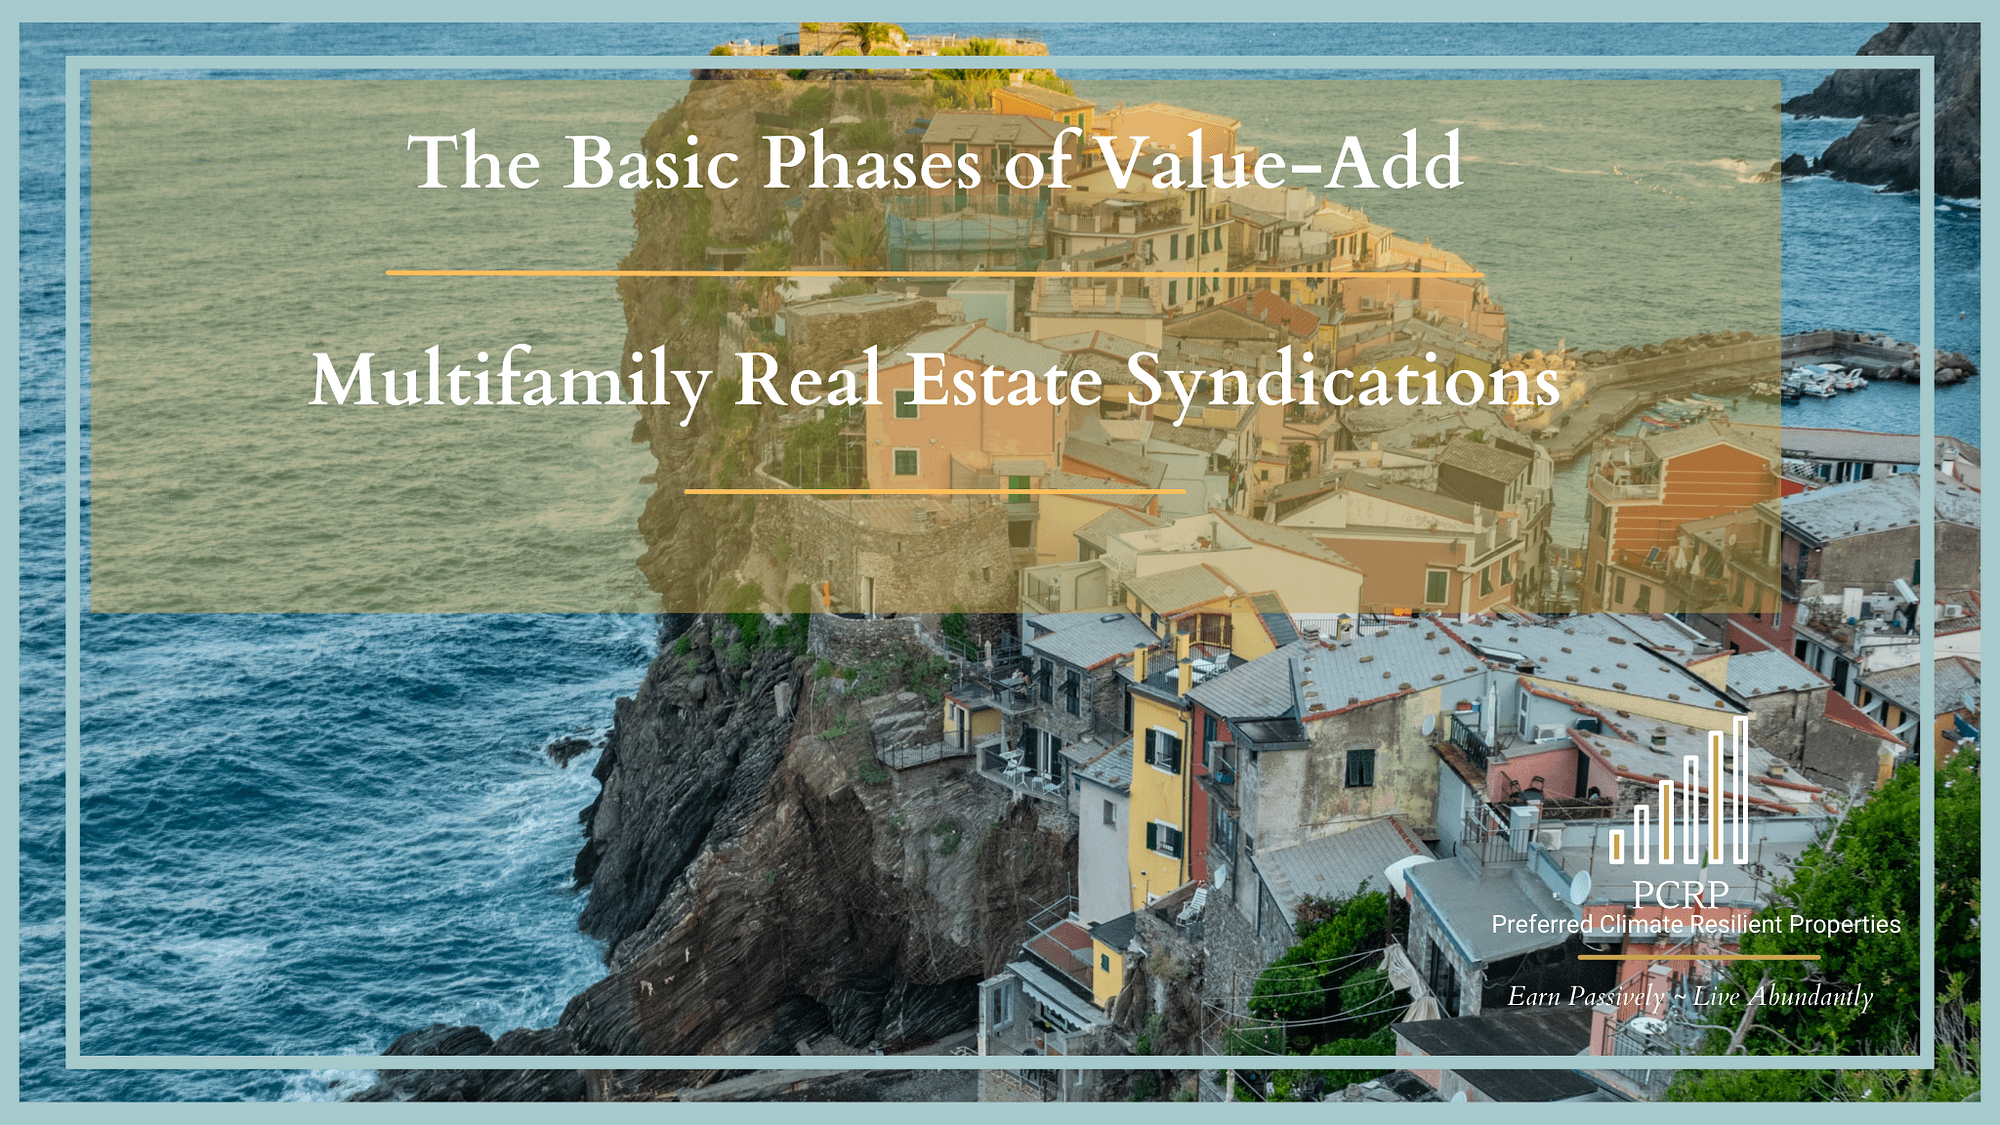 The Basic Phases of Value-Add in Multifamily Real Estate Syndications